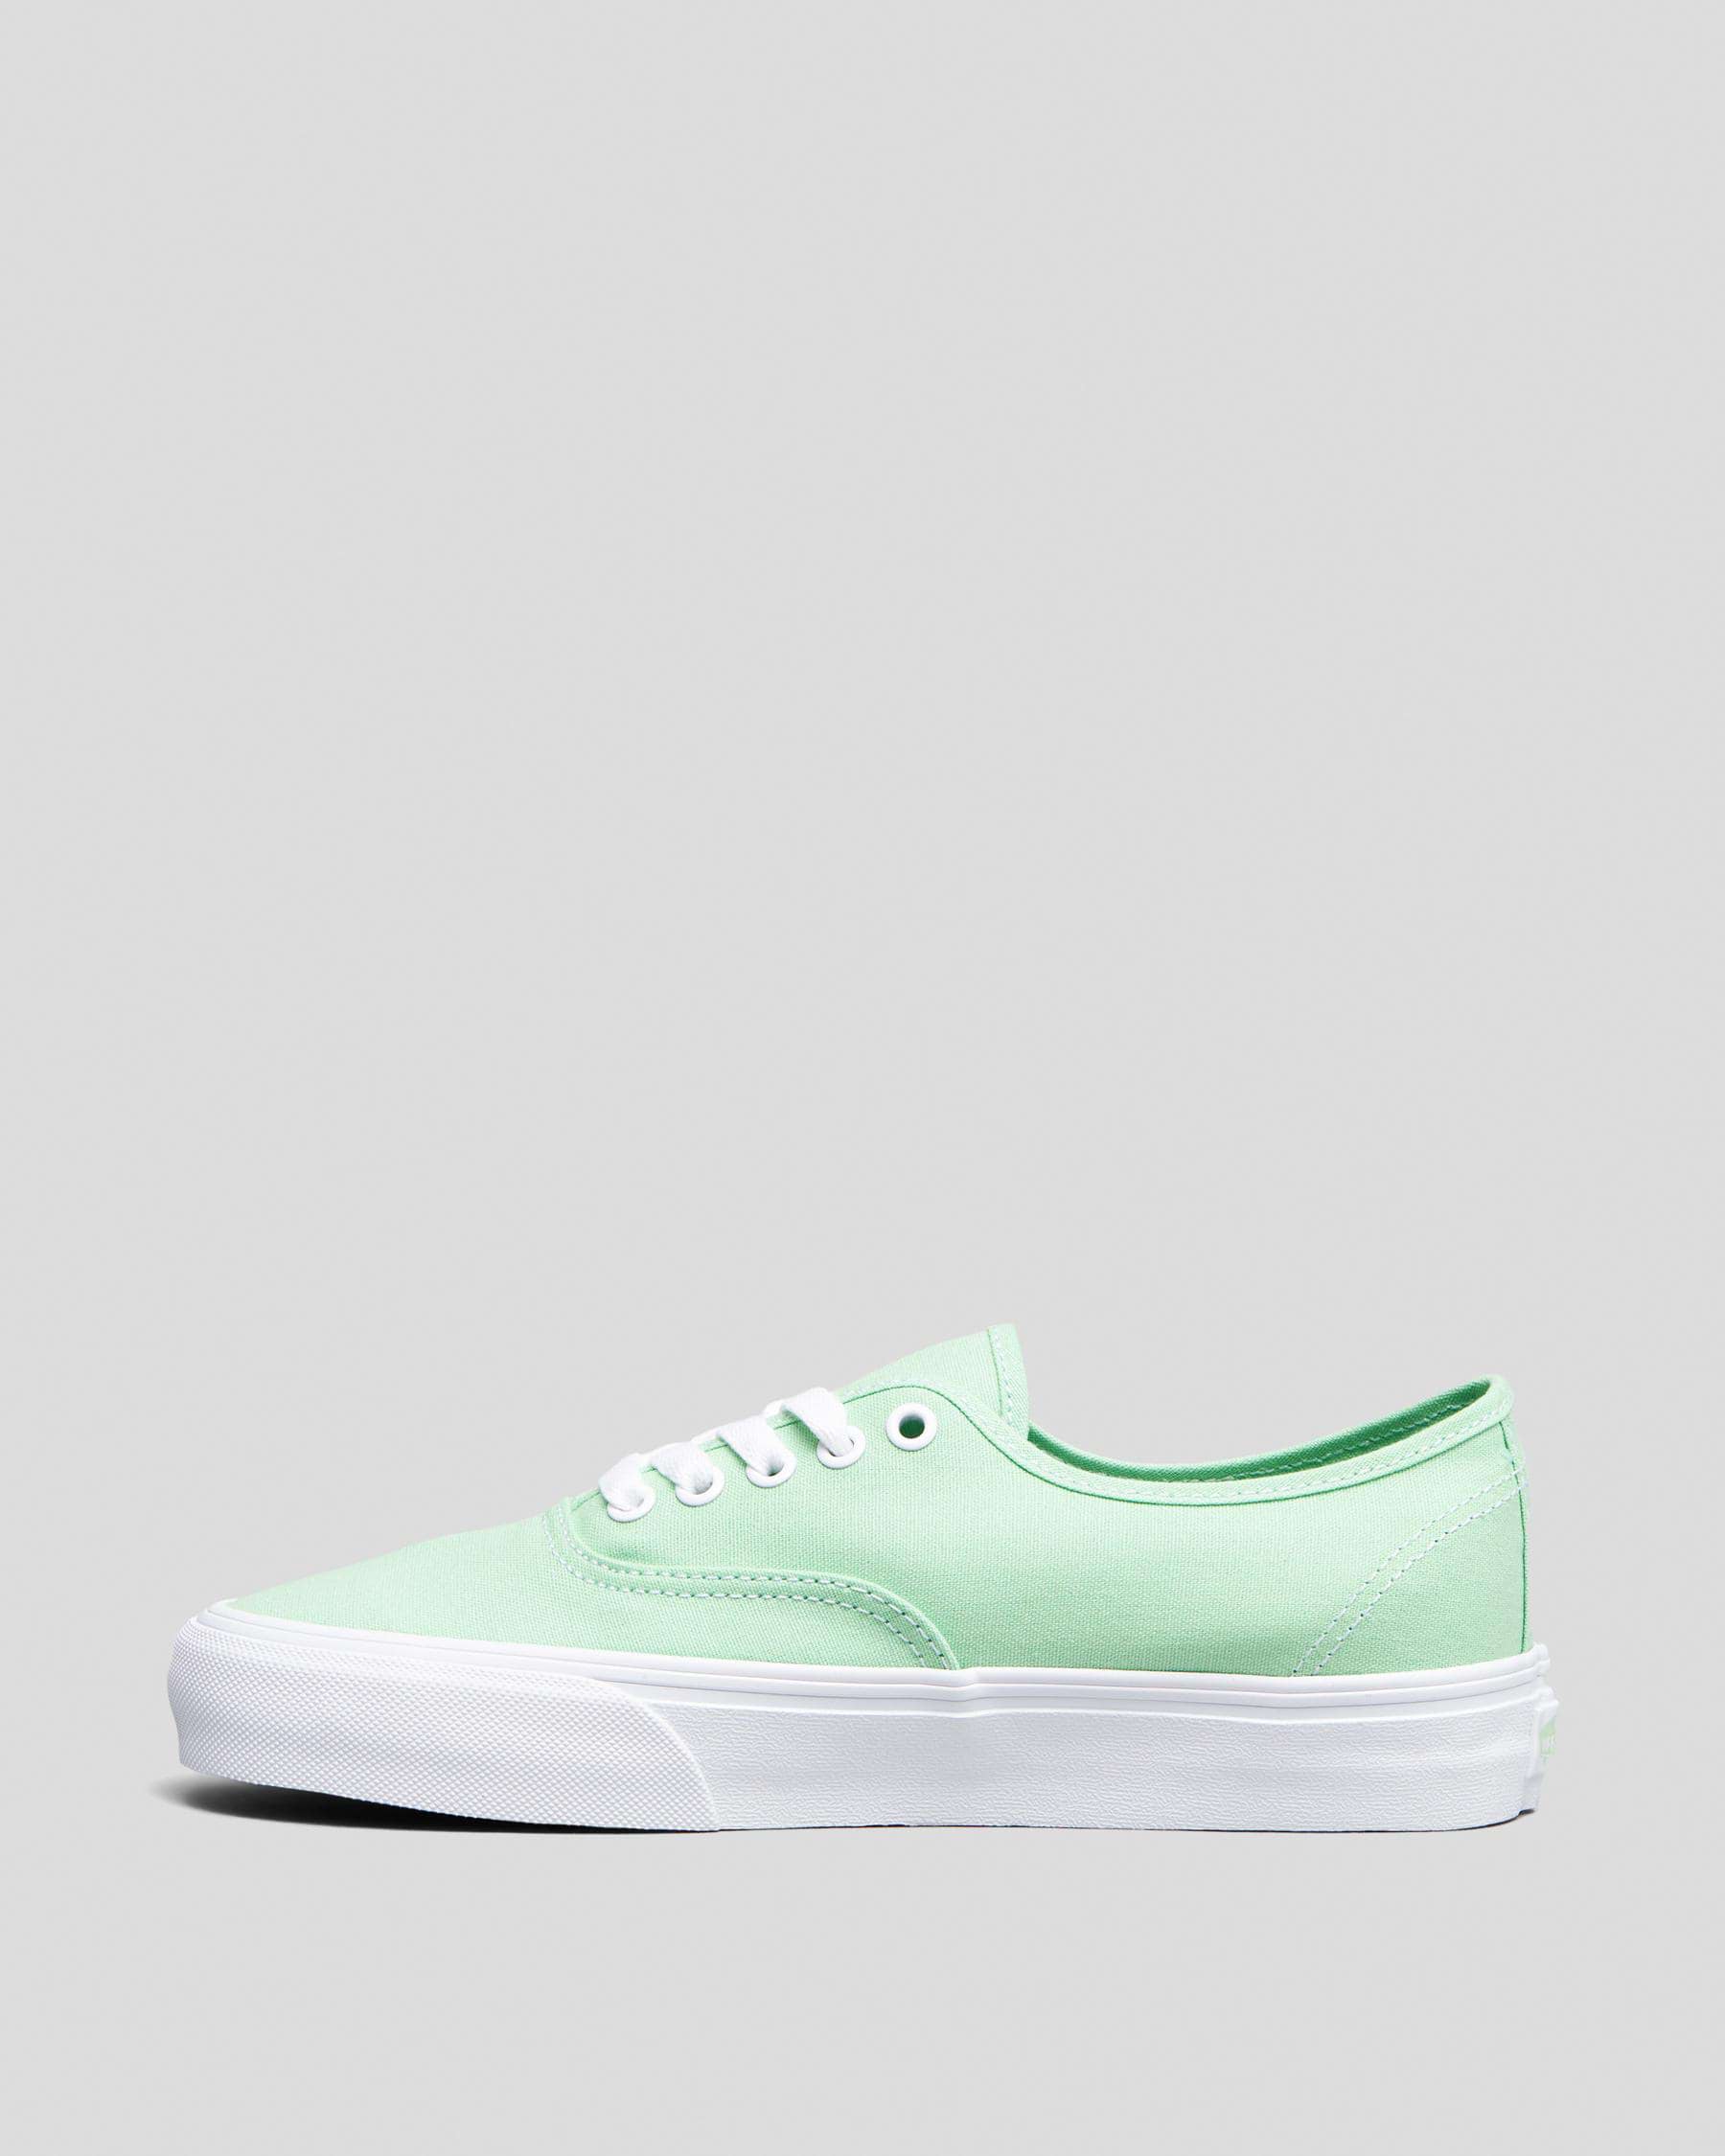 Vans Womens Authentic Shoes In Sunny Day Patina Green - Fast Shipping ...